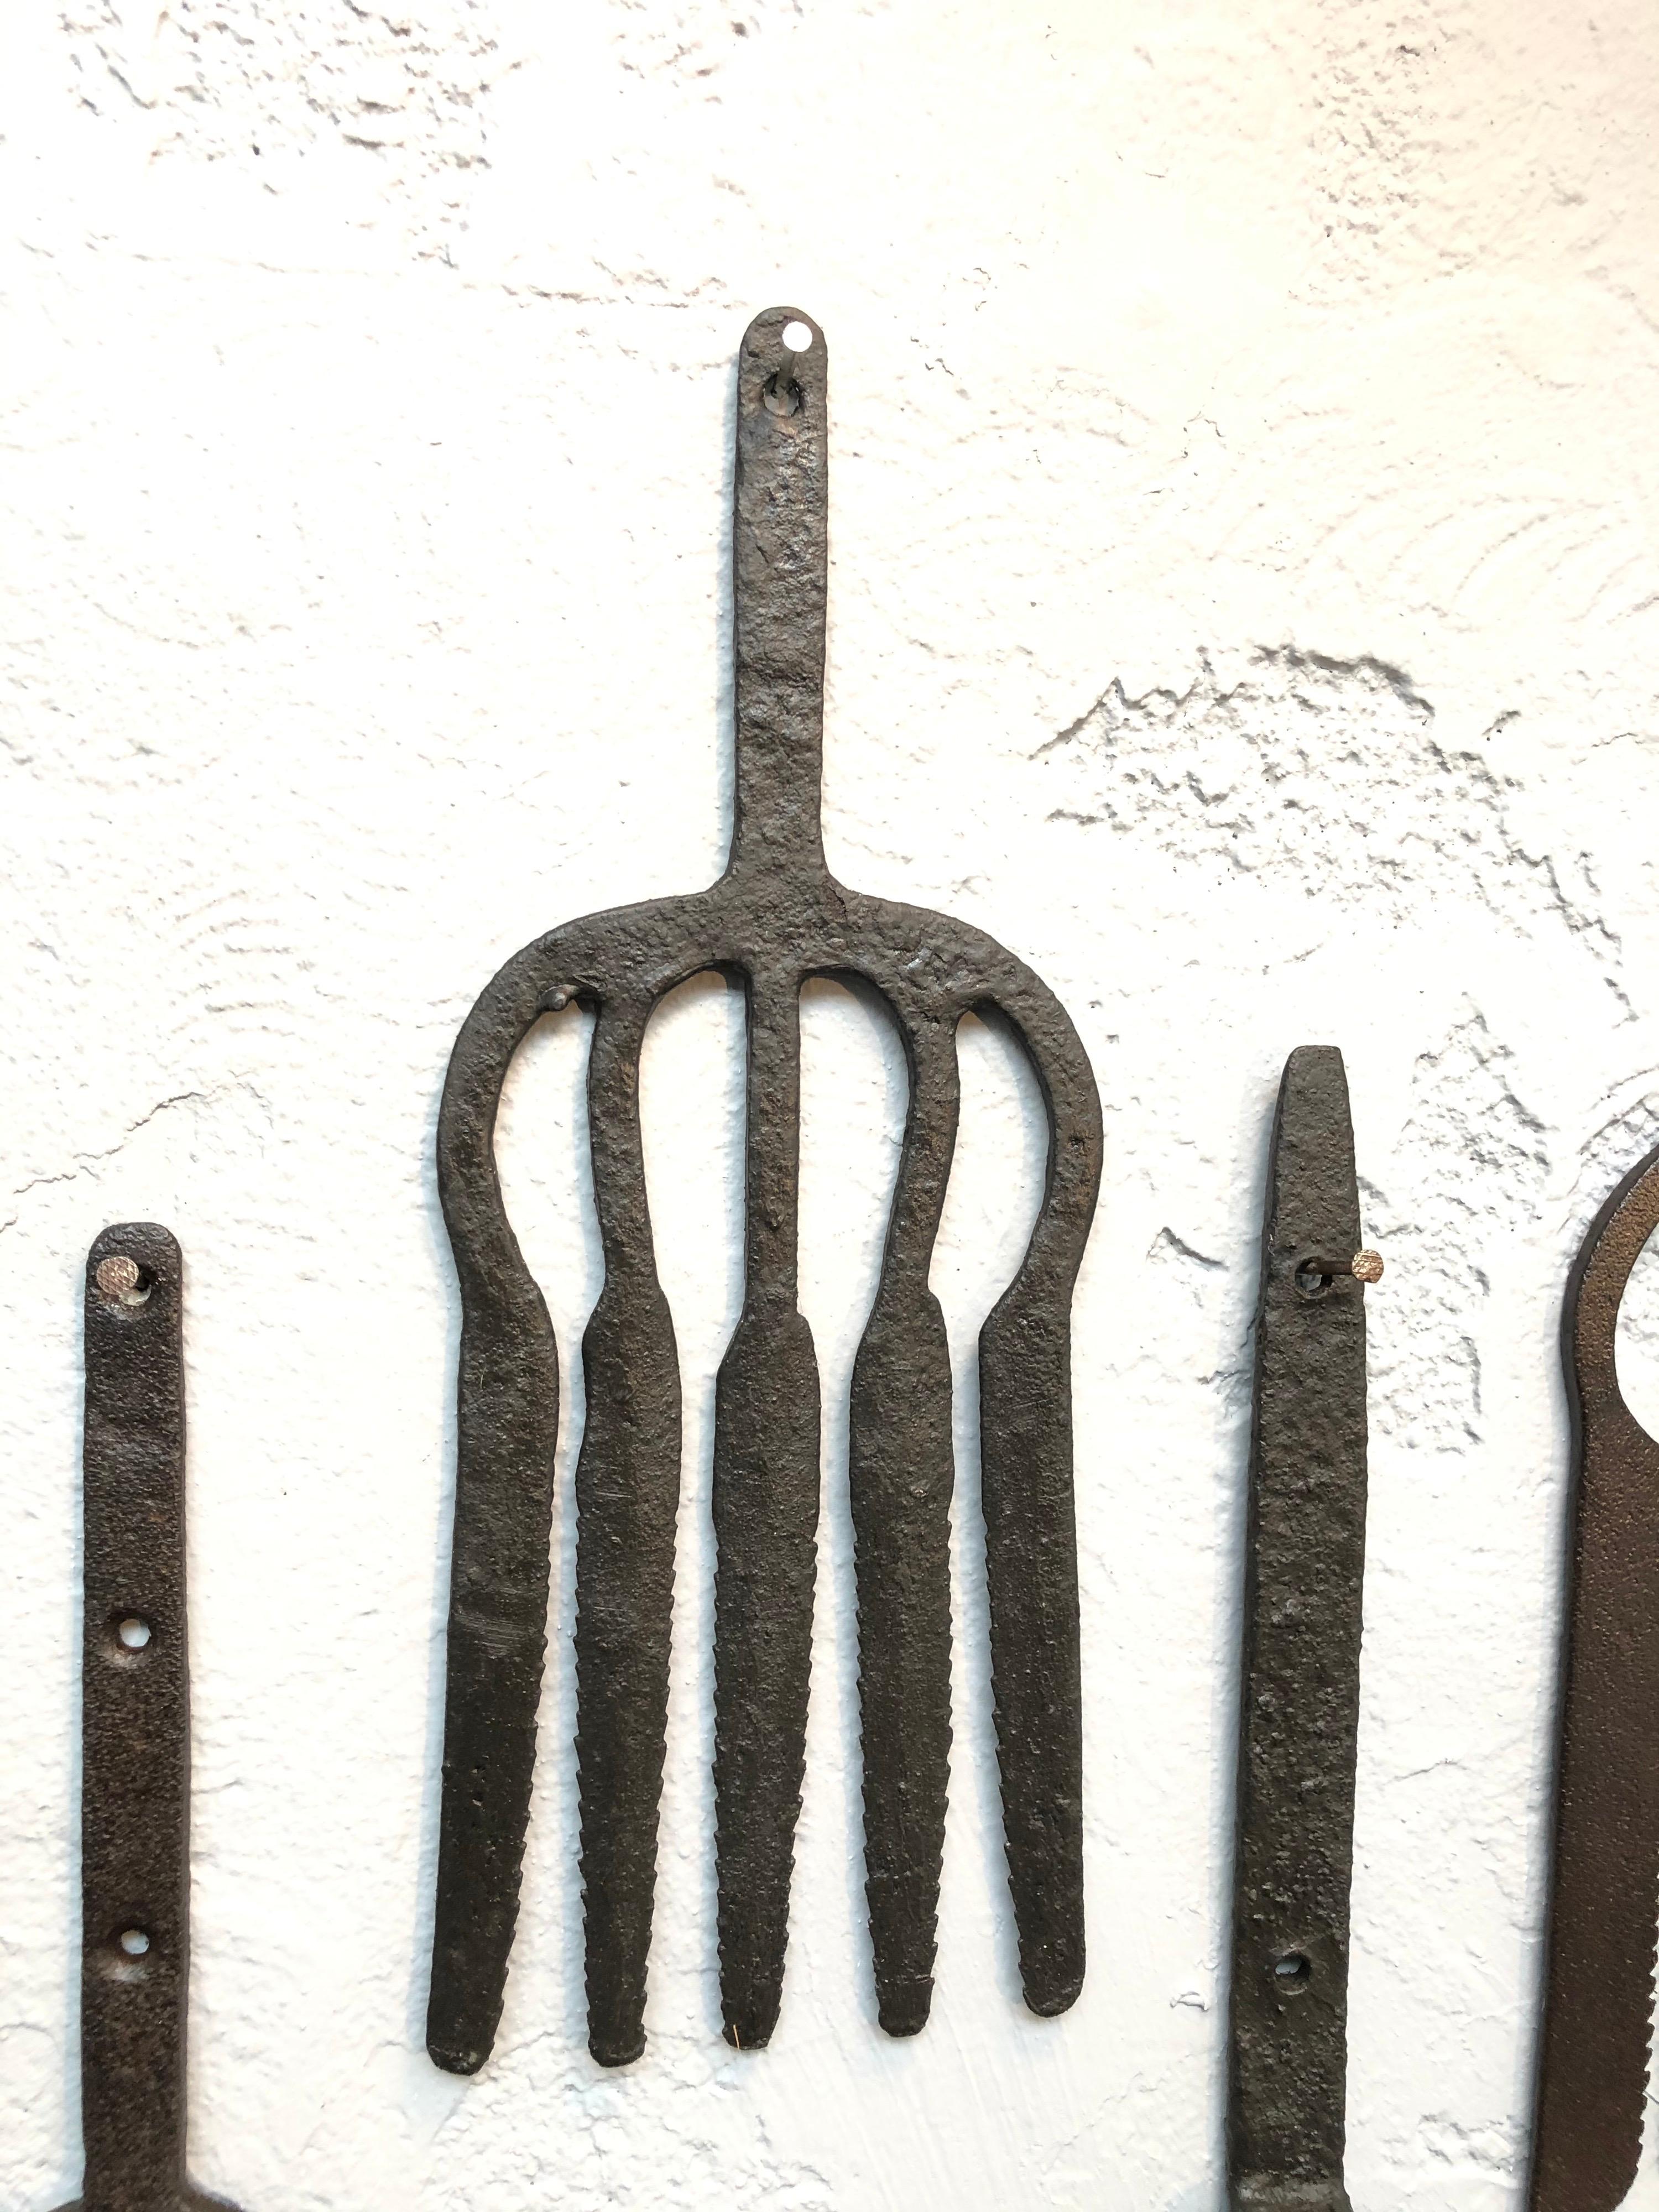 Hand-Crafted Collection of Antique Wrought Iron Eel Forks